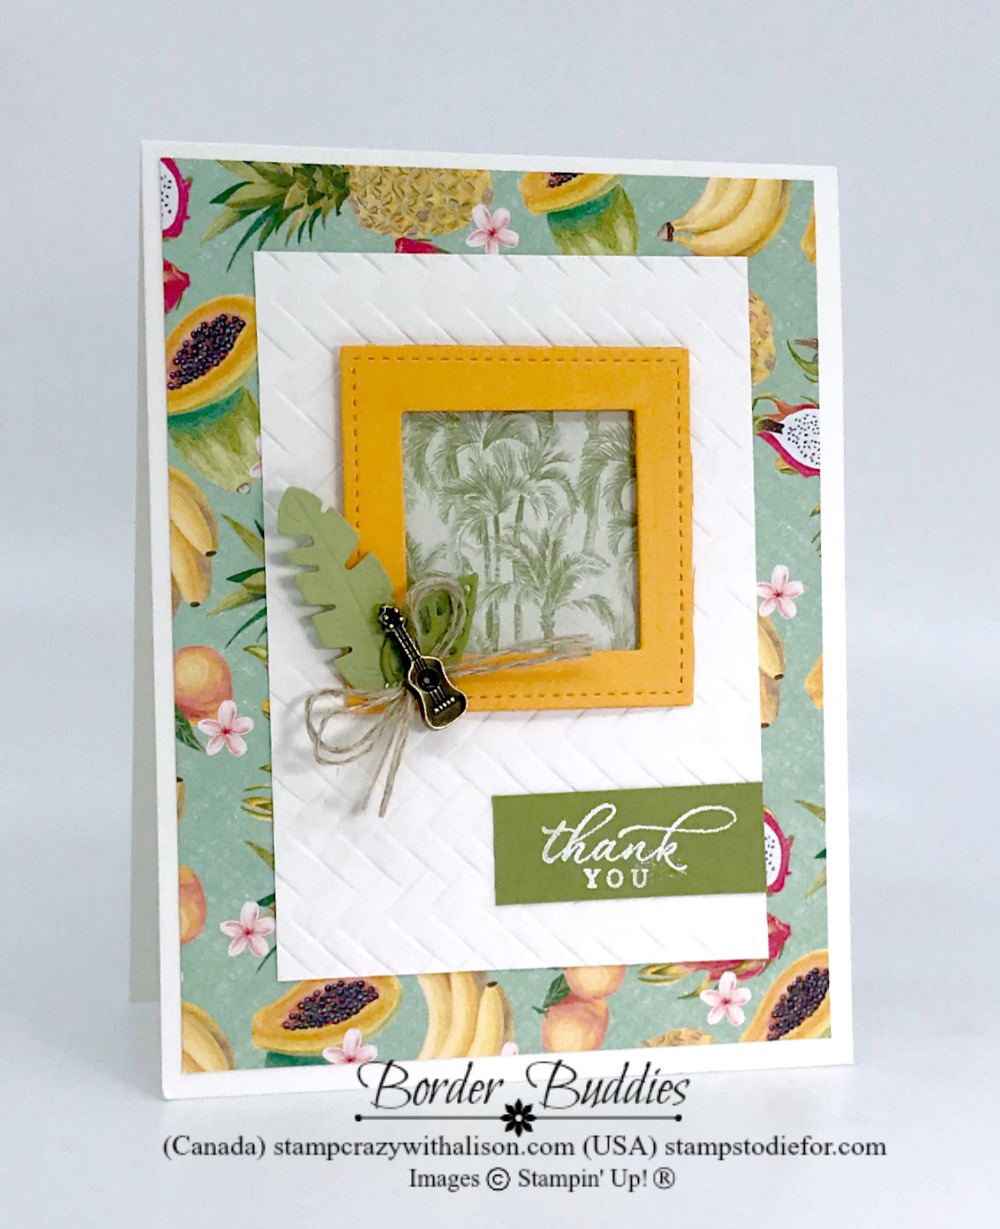 Border Buddy Saturday – Tropical Oasis Suite from Stampin’ Up!®